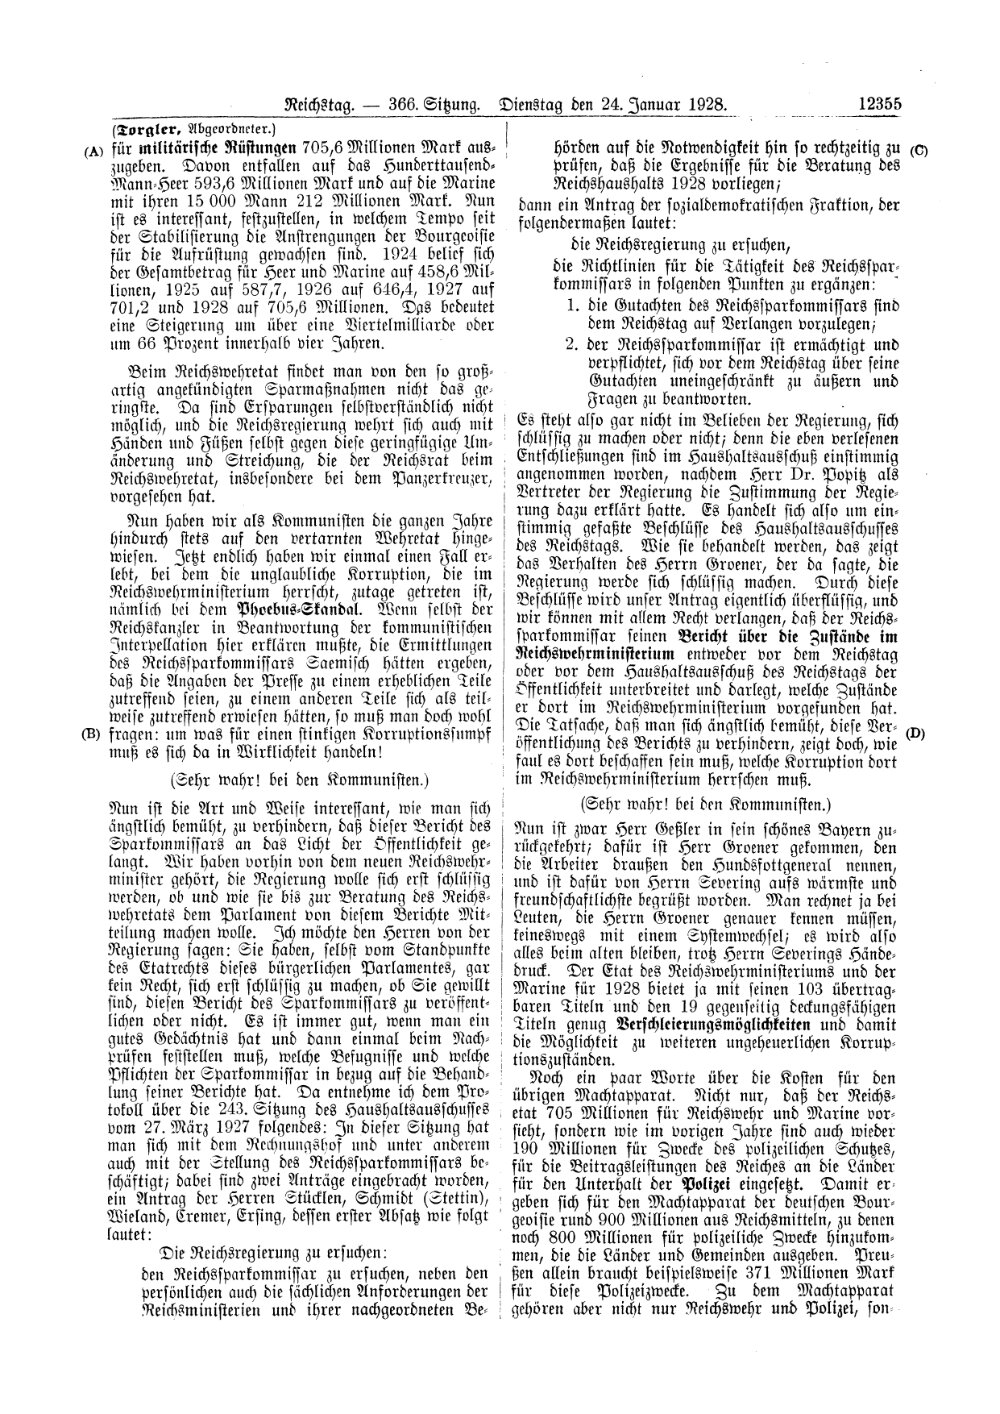 Scan of page 12355